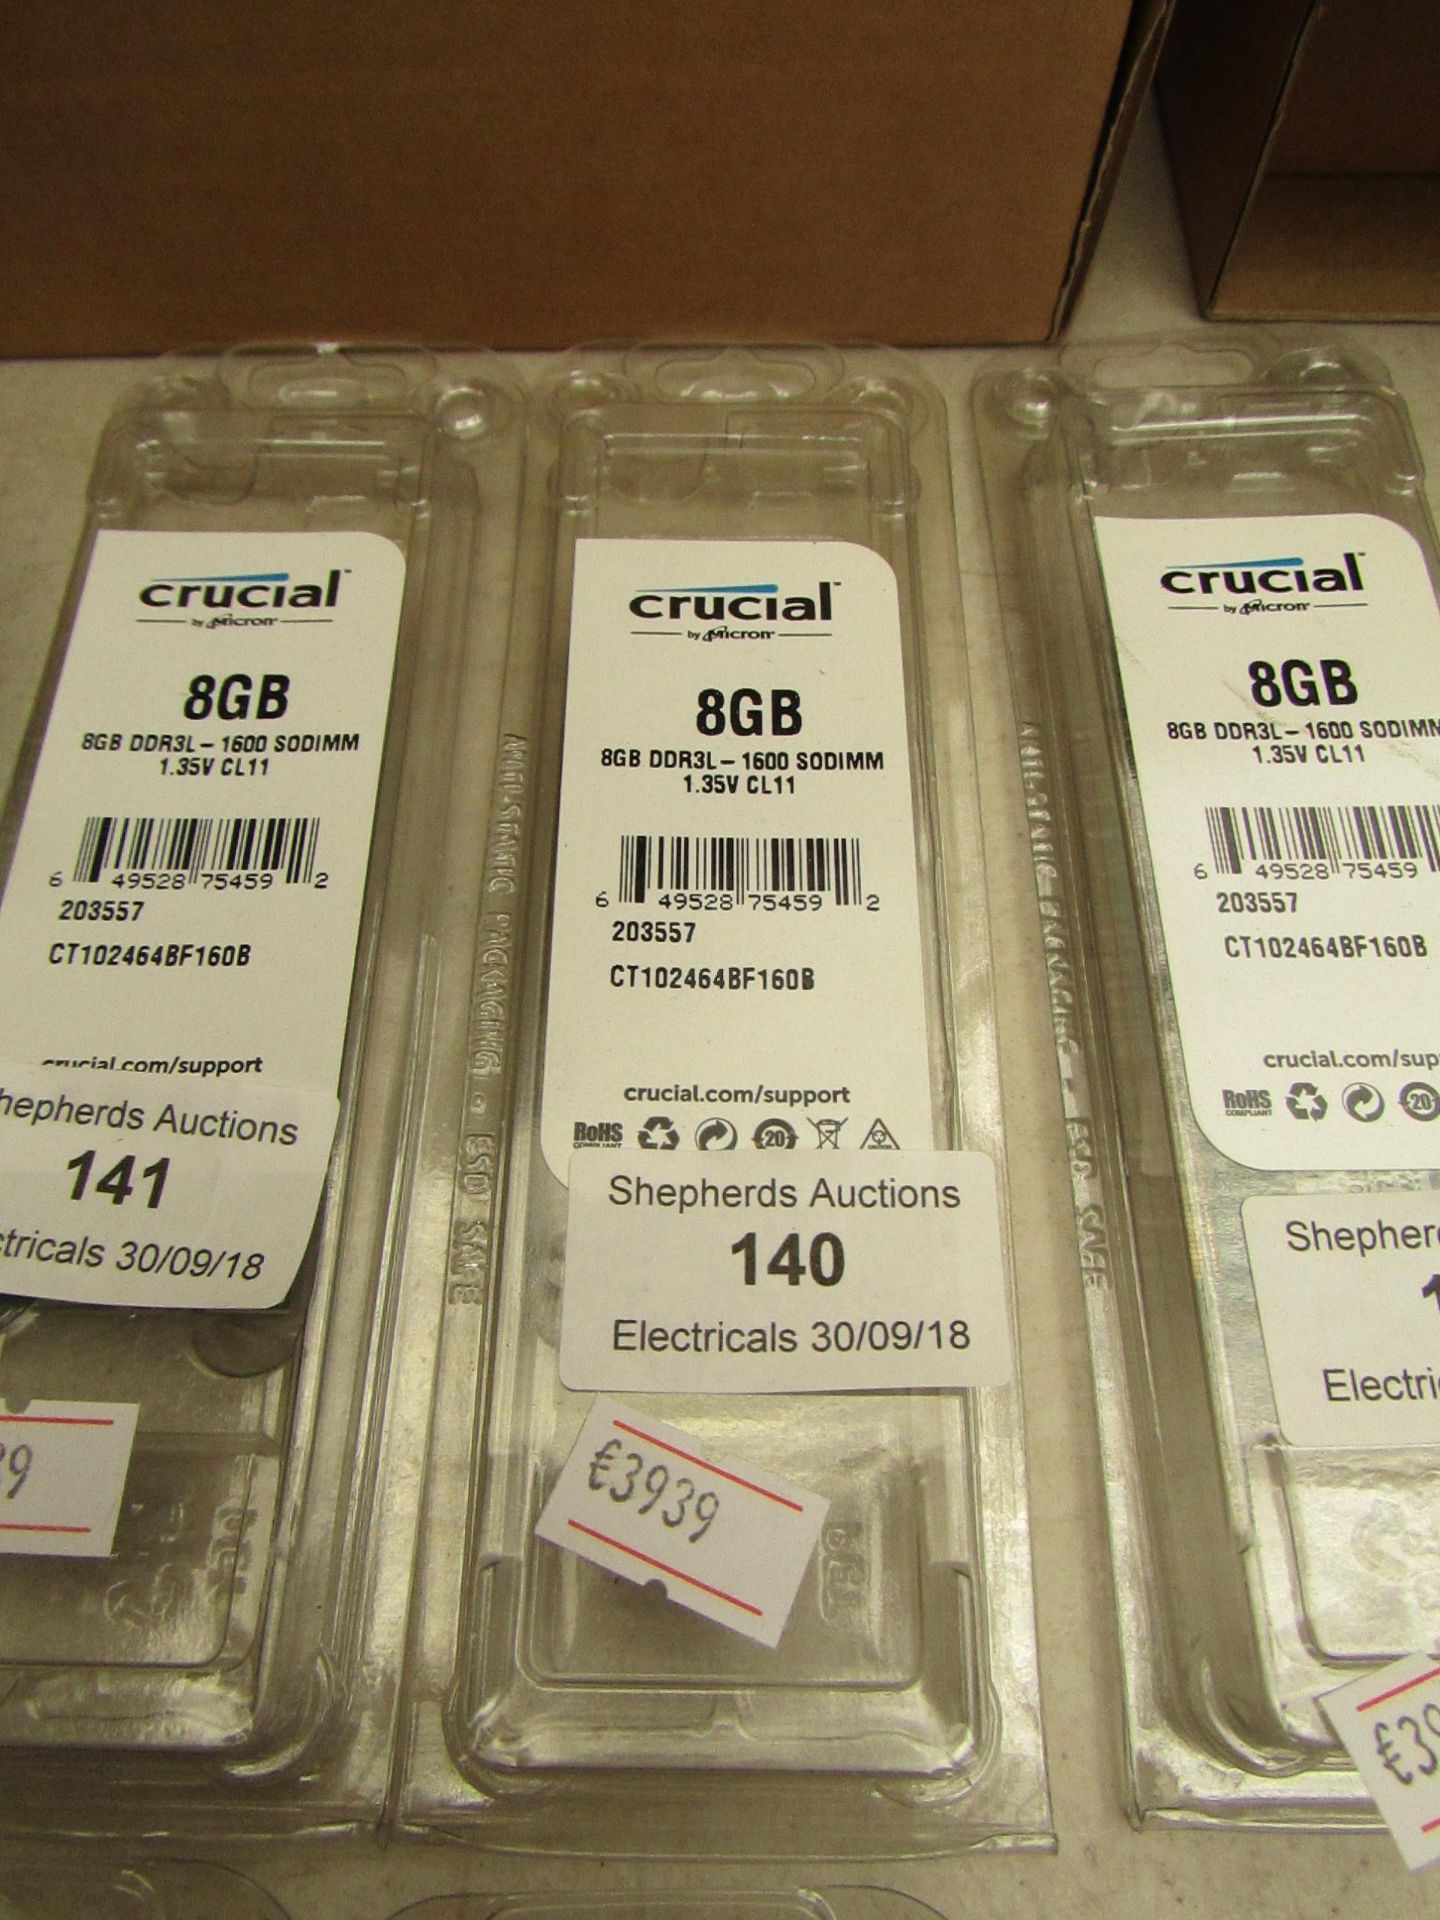 Crucial 8GB memory kit DDR3L - 1600 sodimm, untested but looks unused